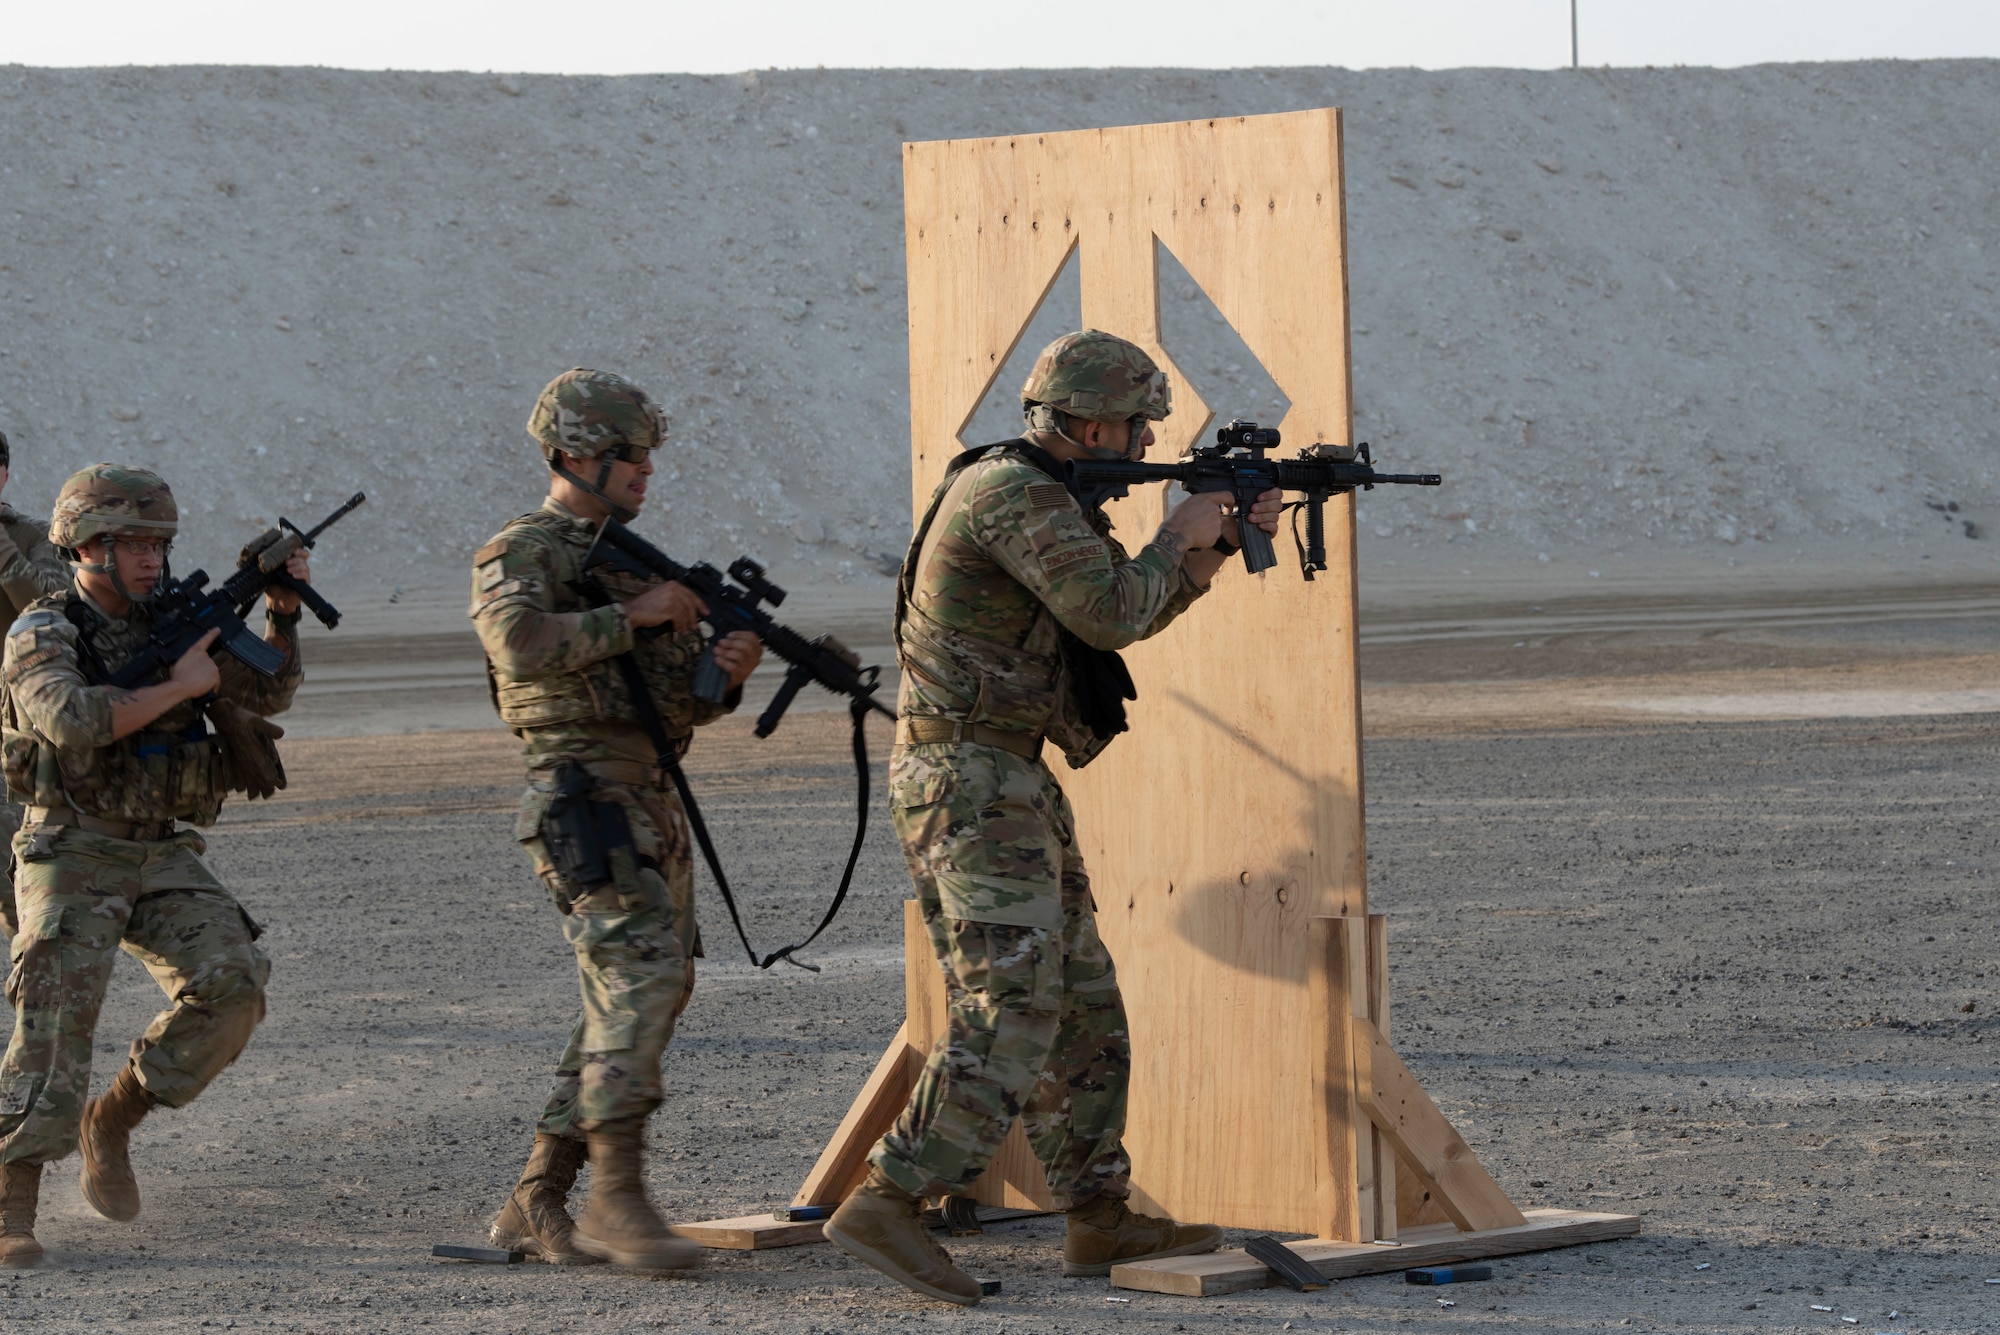 380th Expeditionary Security Forces Squadron Airmen fire from behind a barrier during a simunition proficiency firing course held on Al Dhafra Air Base, United Arab Emirates, Sept. 29, 2019.